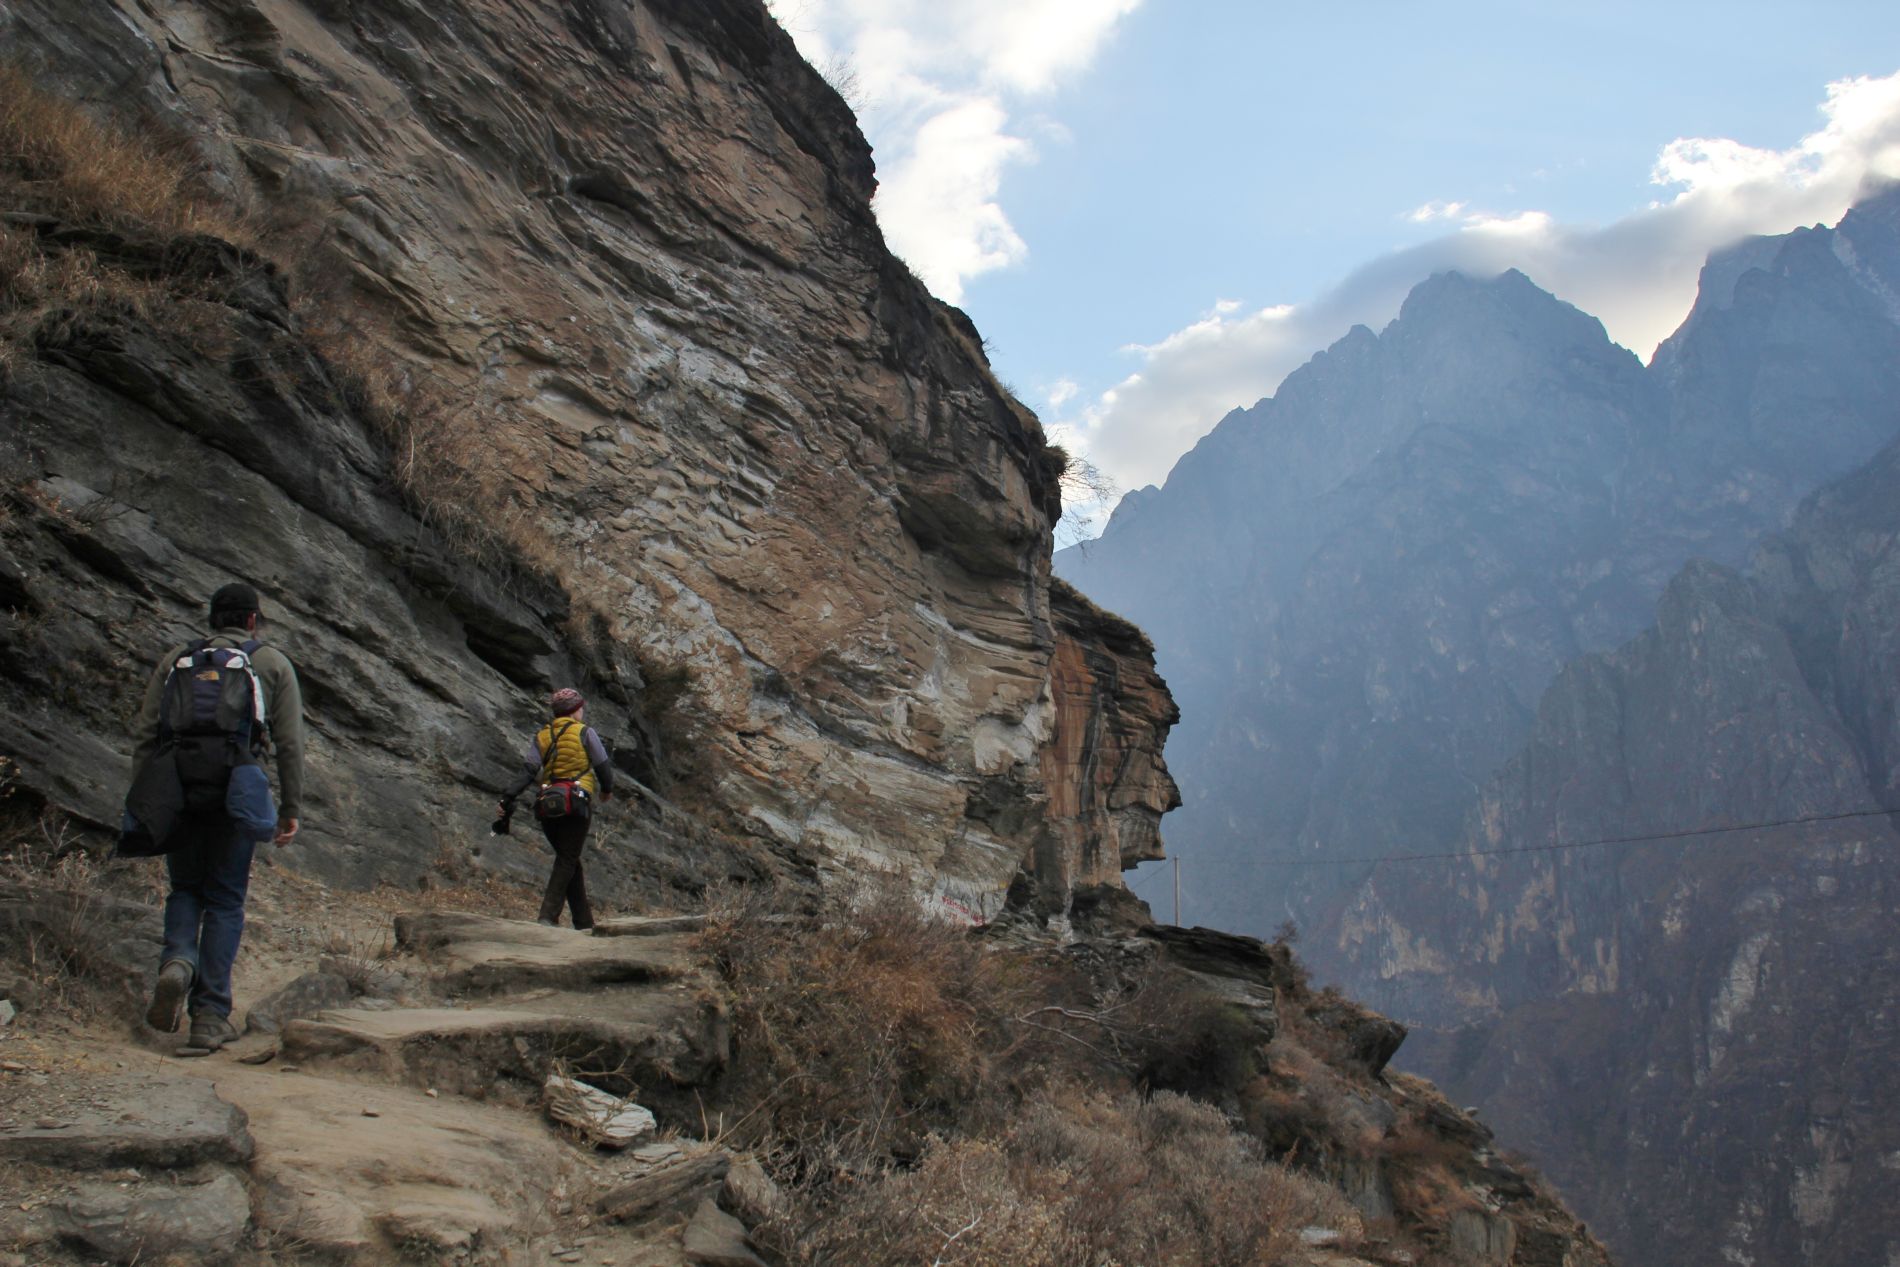 Hikers trek through China's Tiger Leaping Gorge.